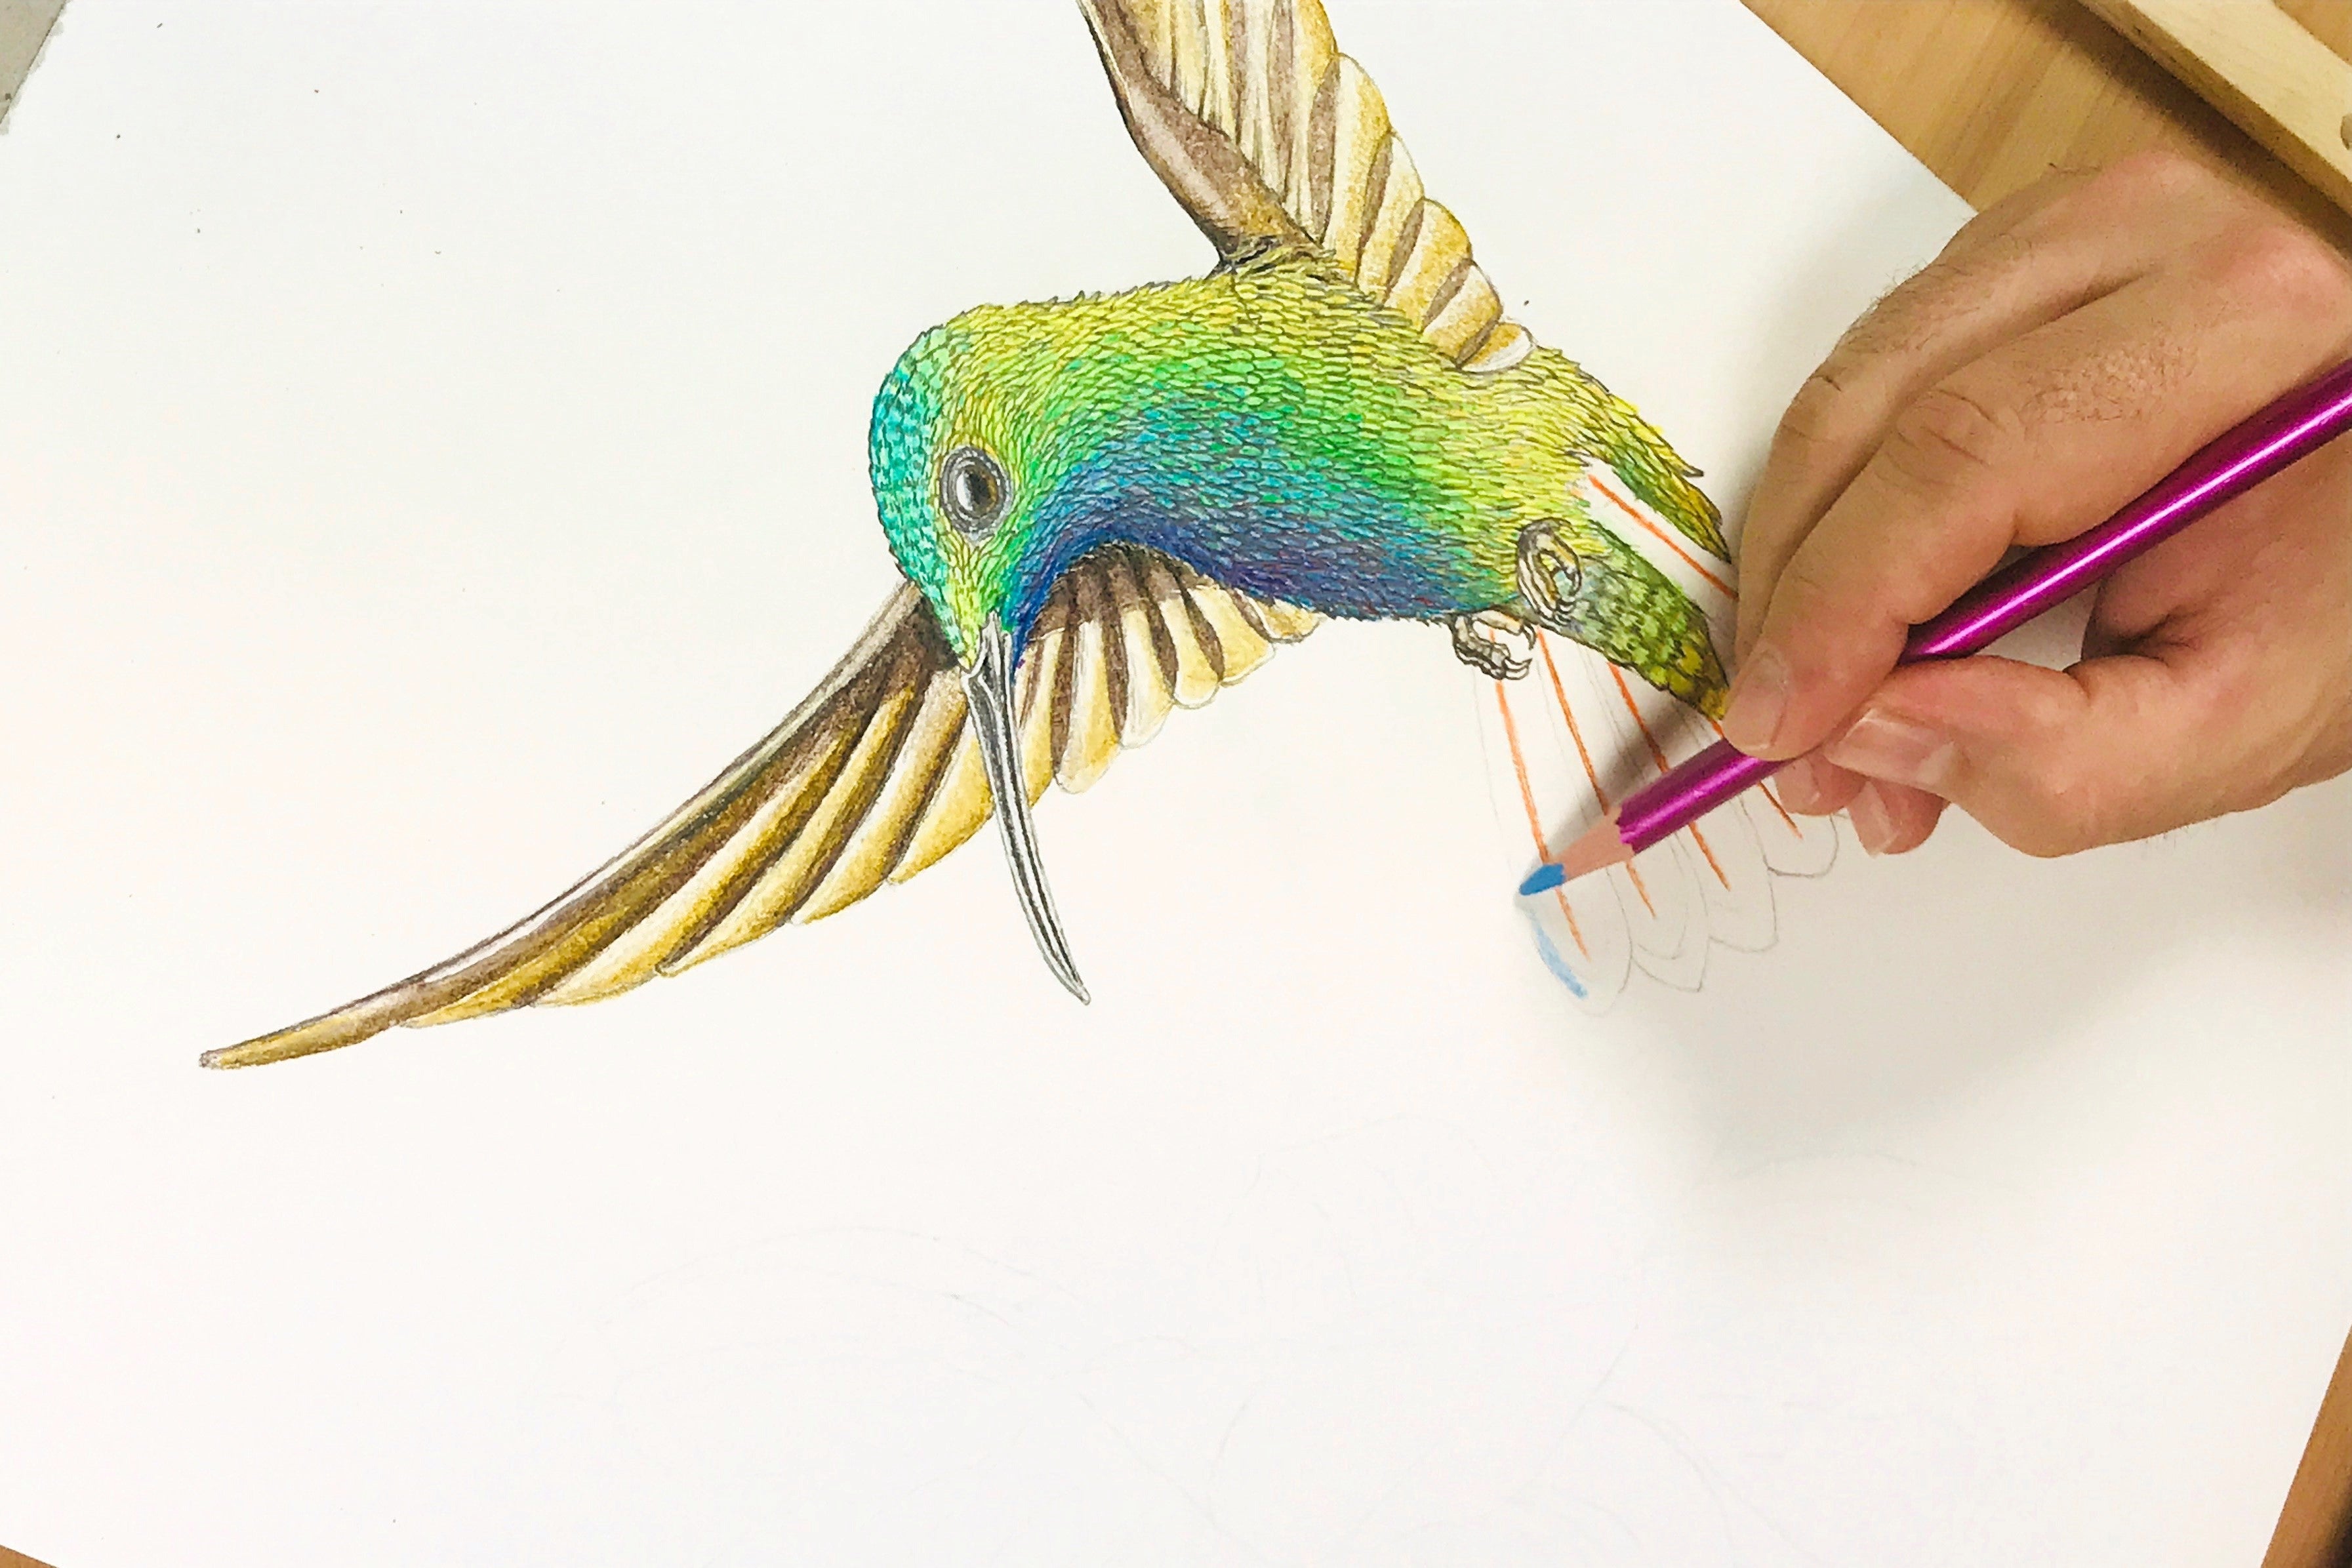 7. Coloured pencil drawing of a hummingbird in flight